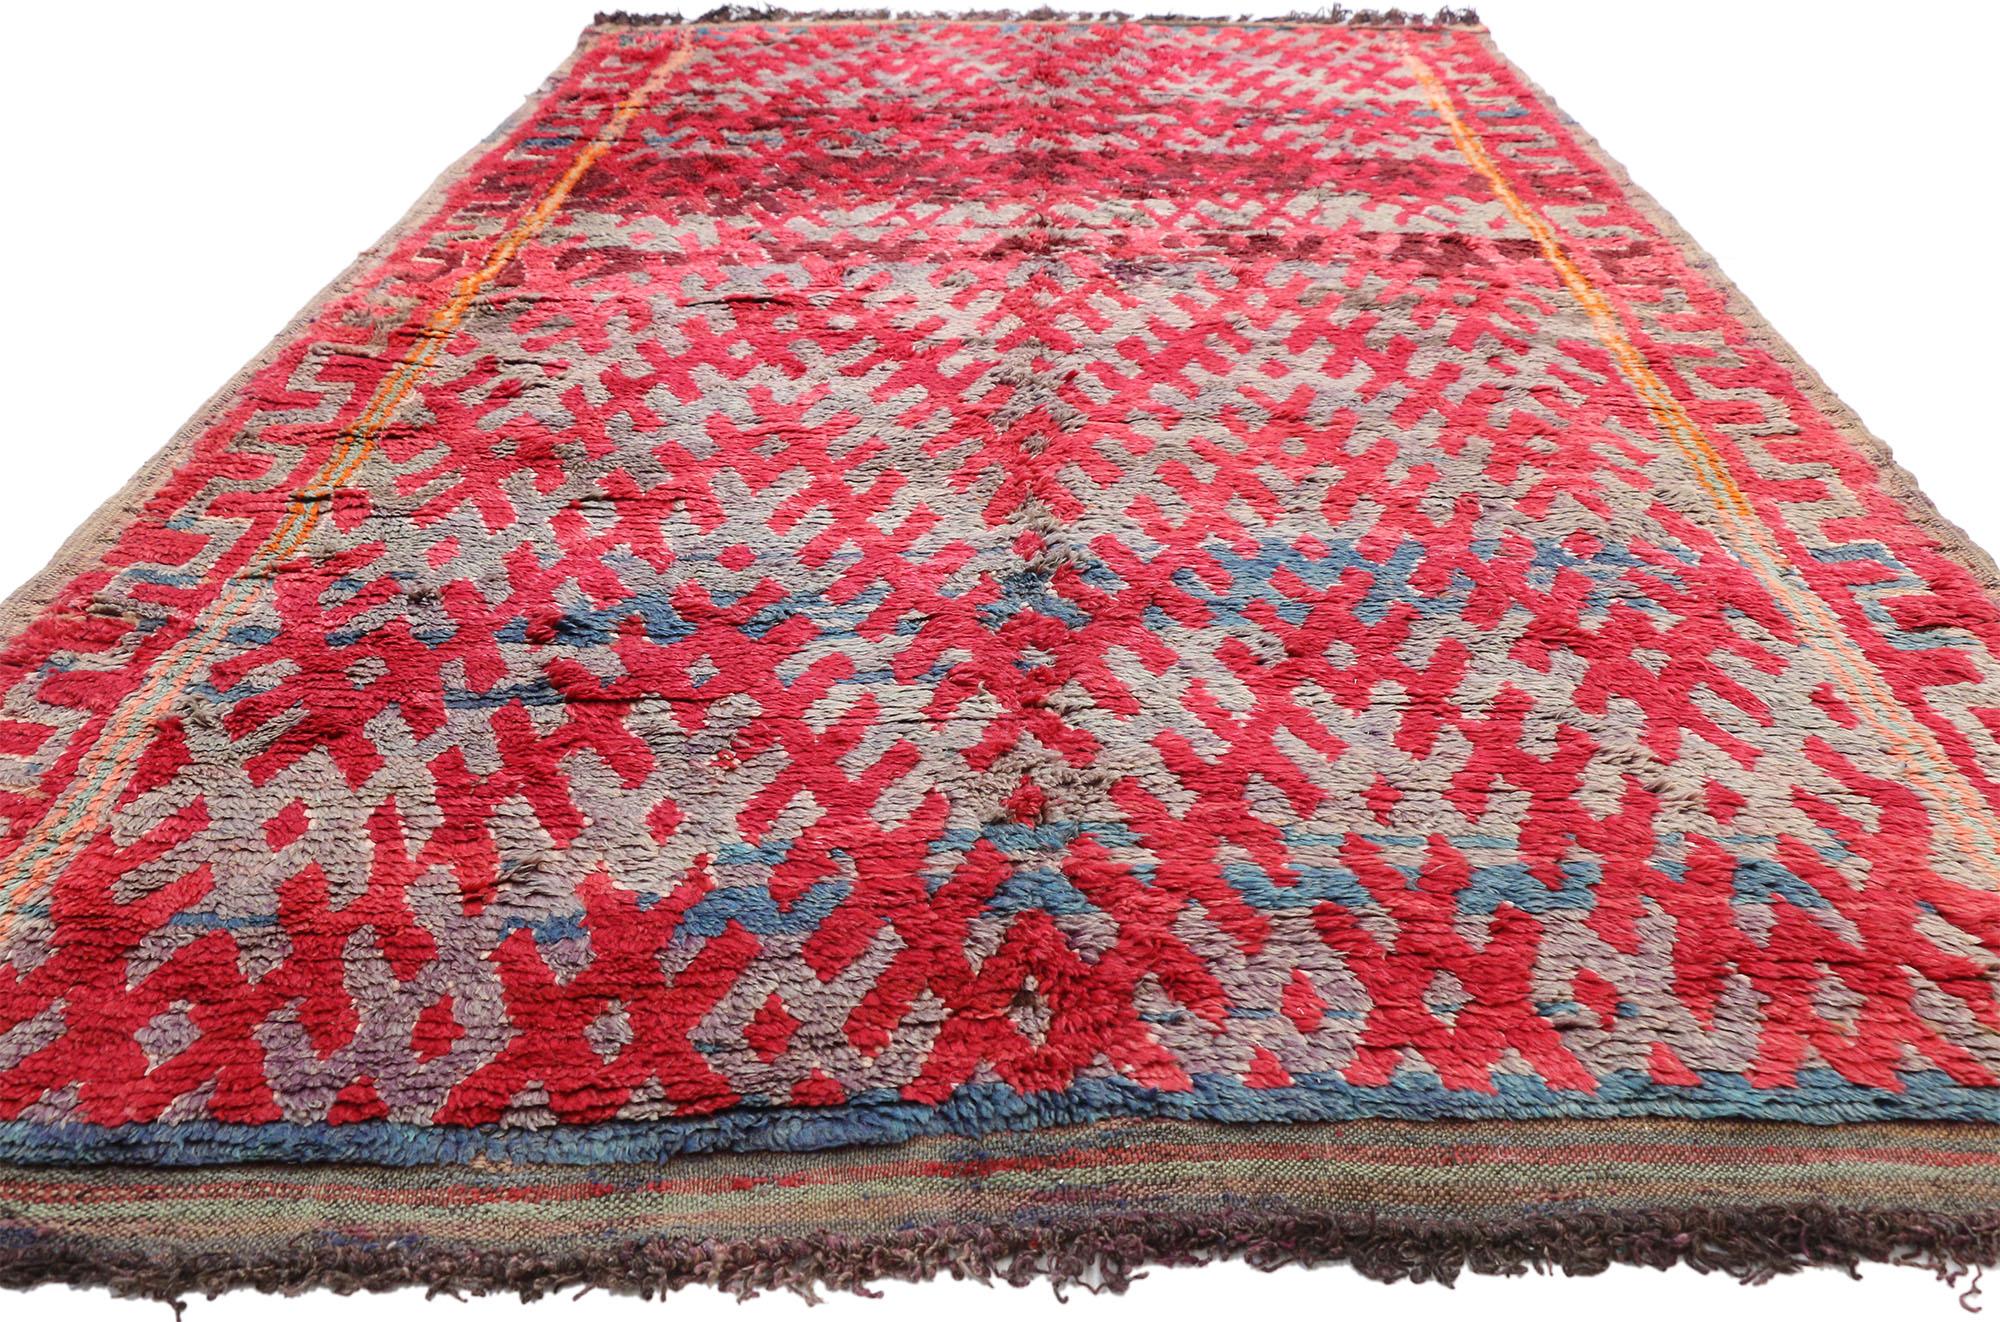 Vintage Moroccan Rug, Berber Moroccan Rug with Vibrant Mid-Century Modern Style 4